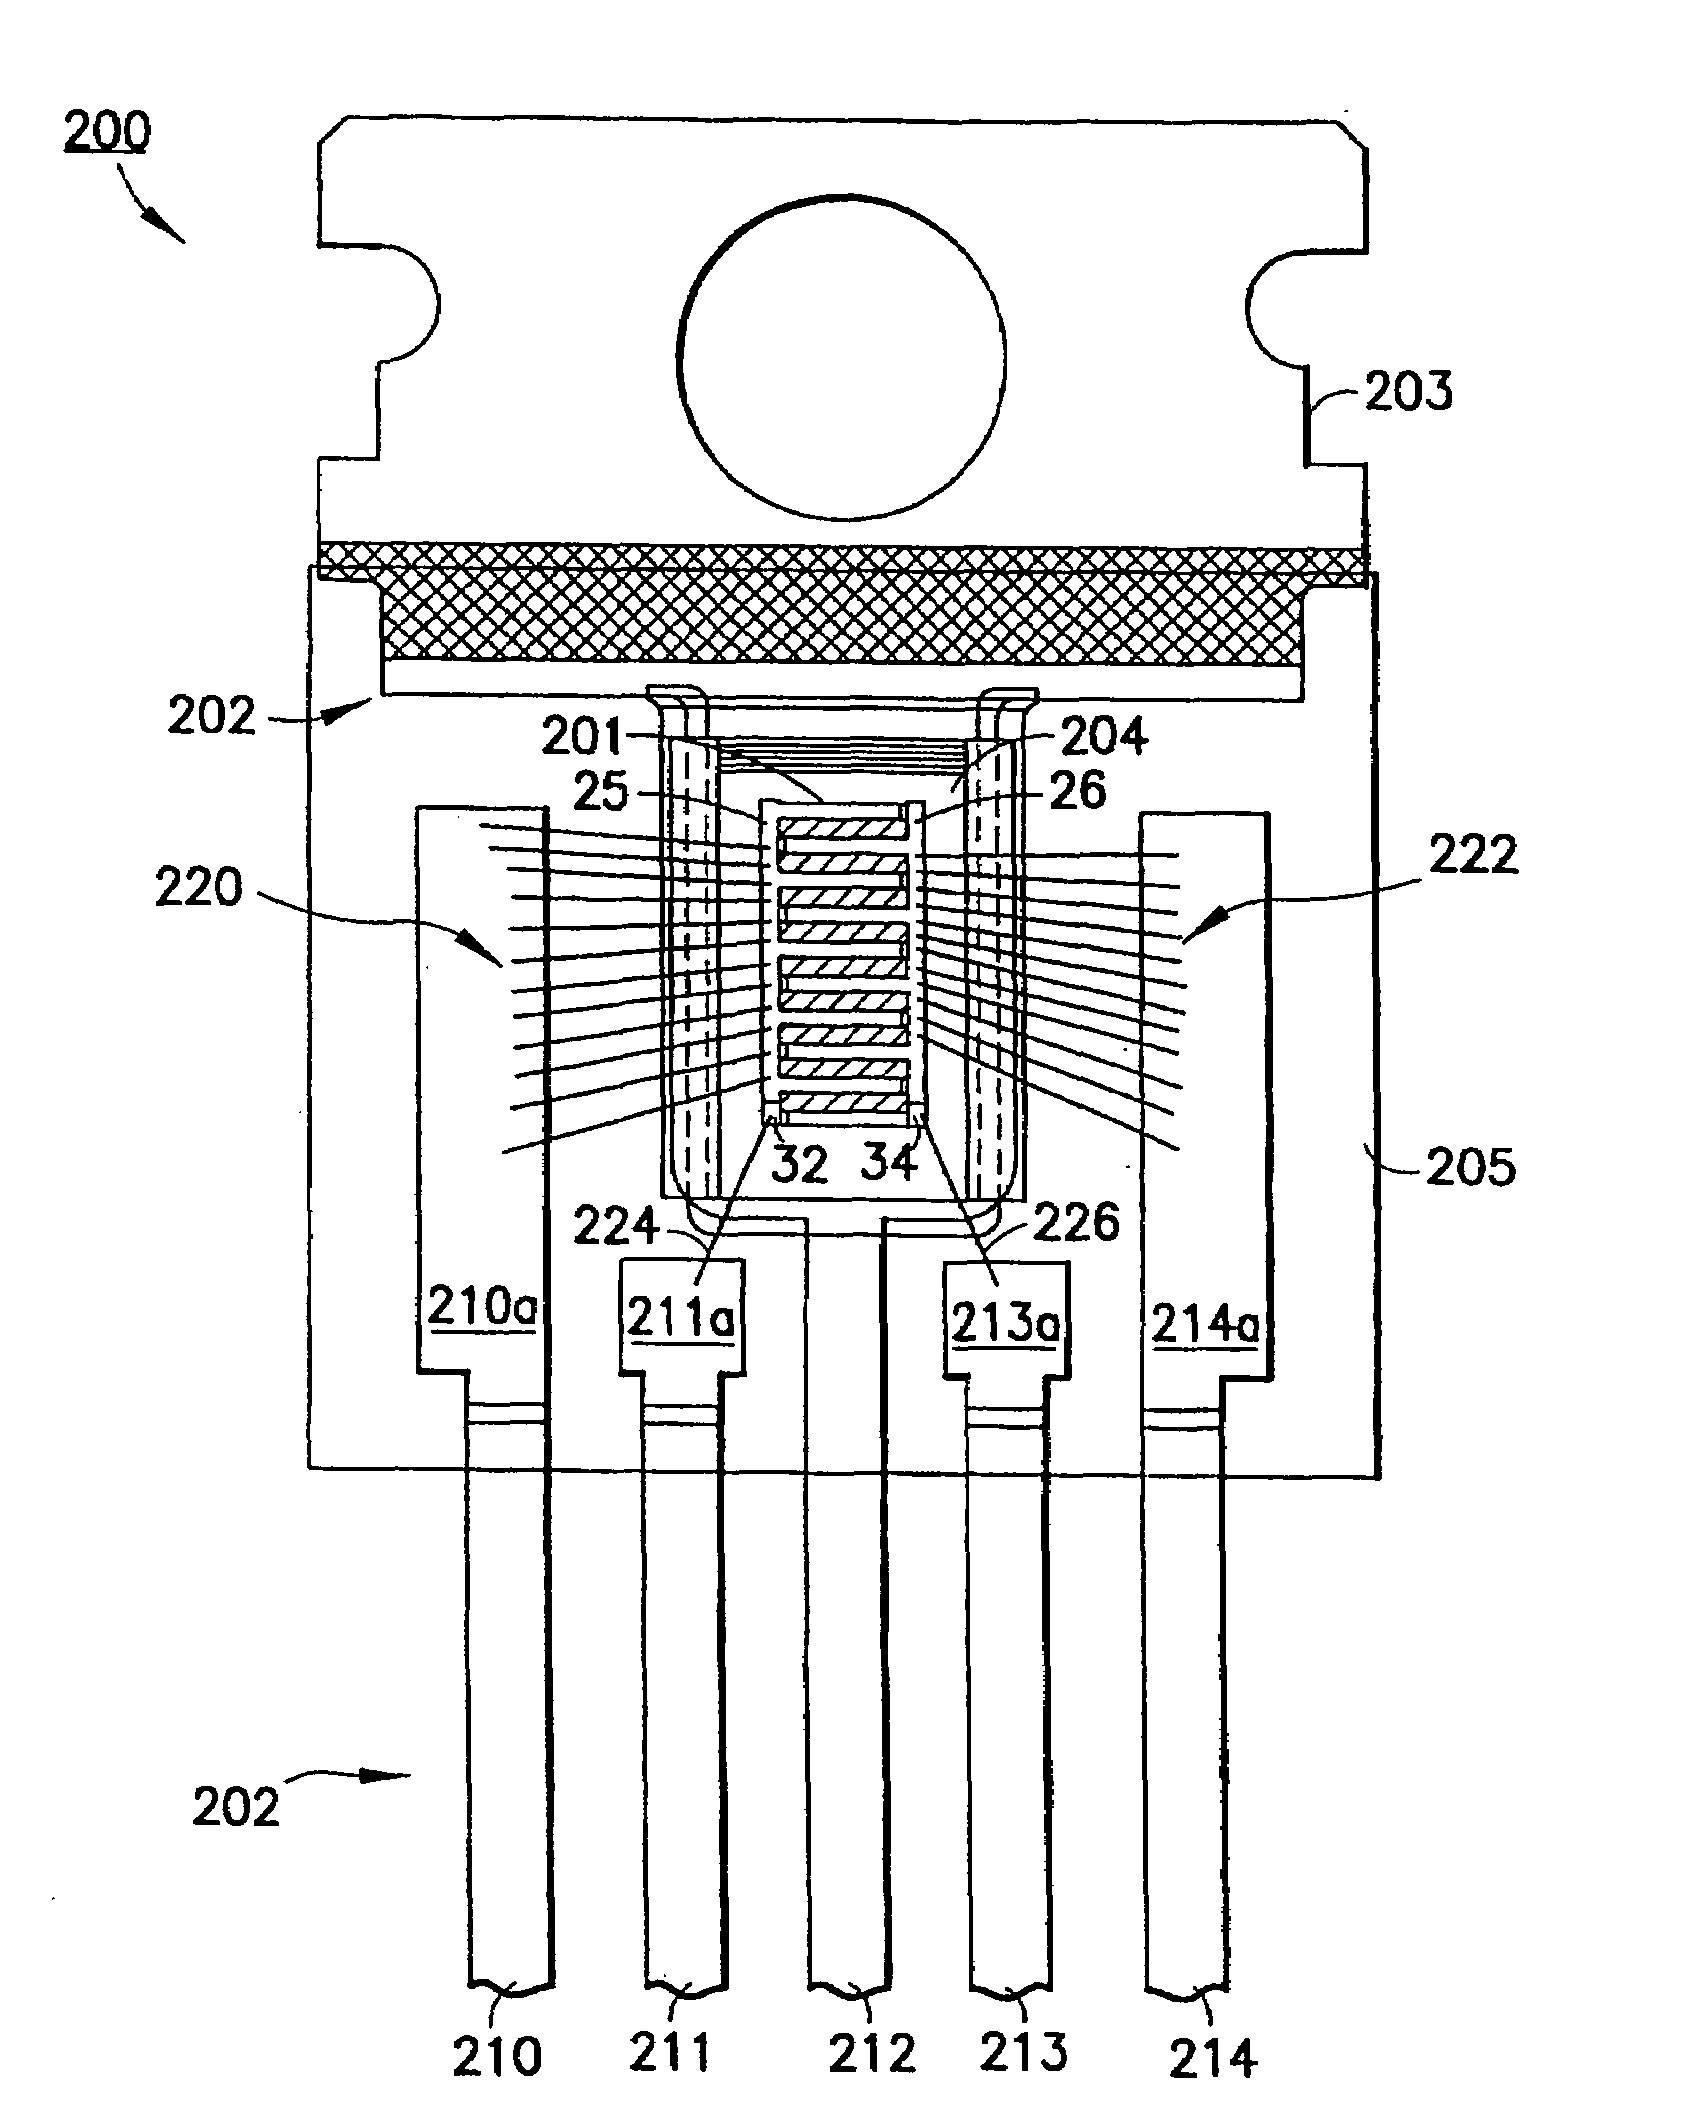 Wirebonded device packages for semiconductor devices having elongated electrodes